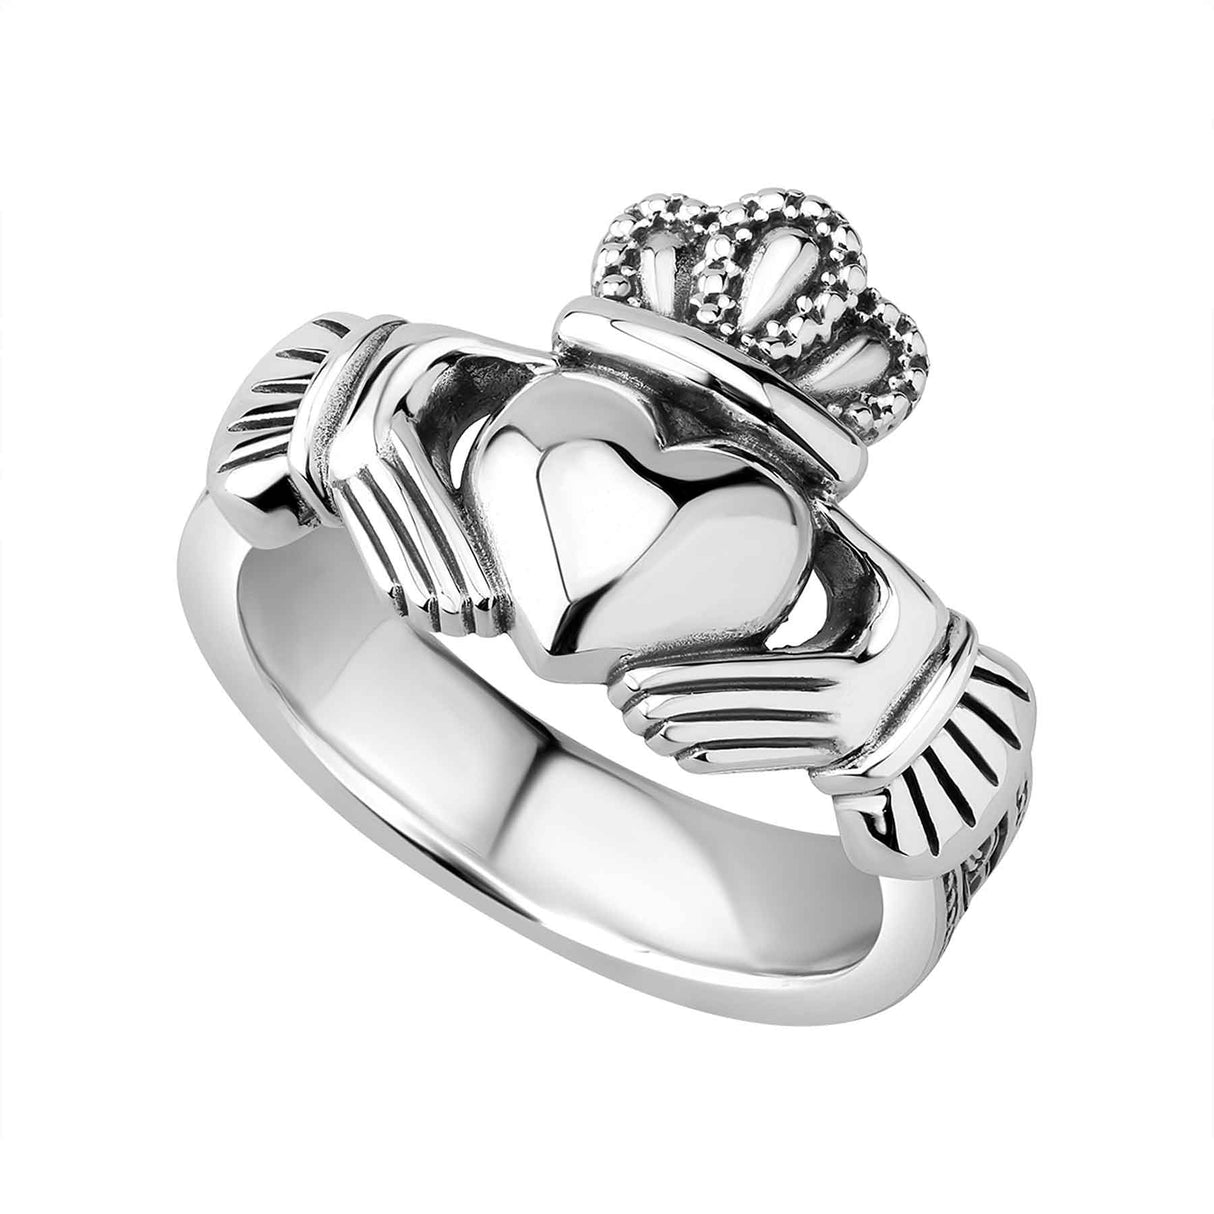 Silver Large Celtic Claddagh Ring - Creative Irish Gifts